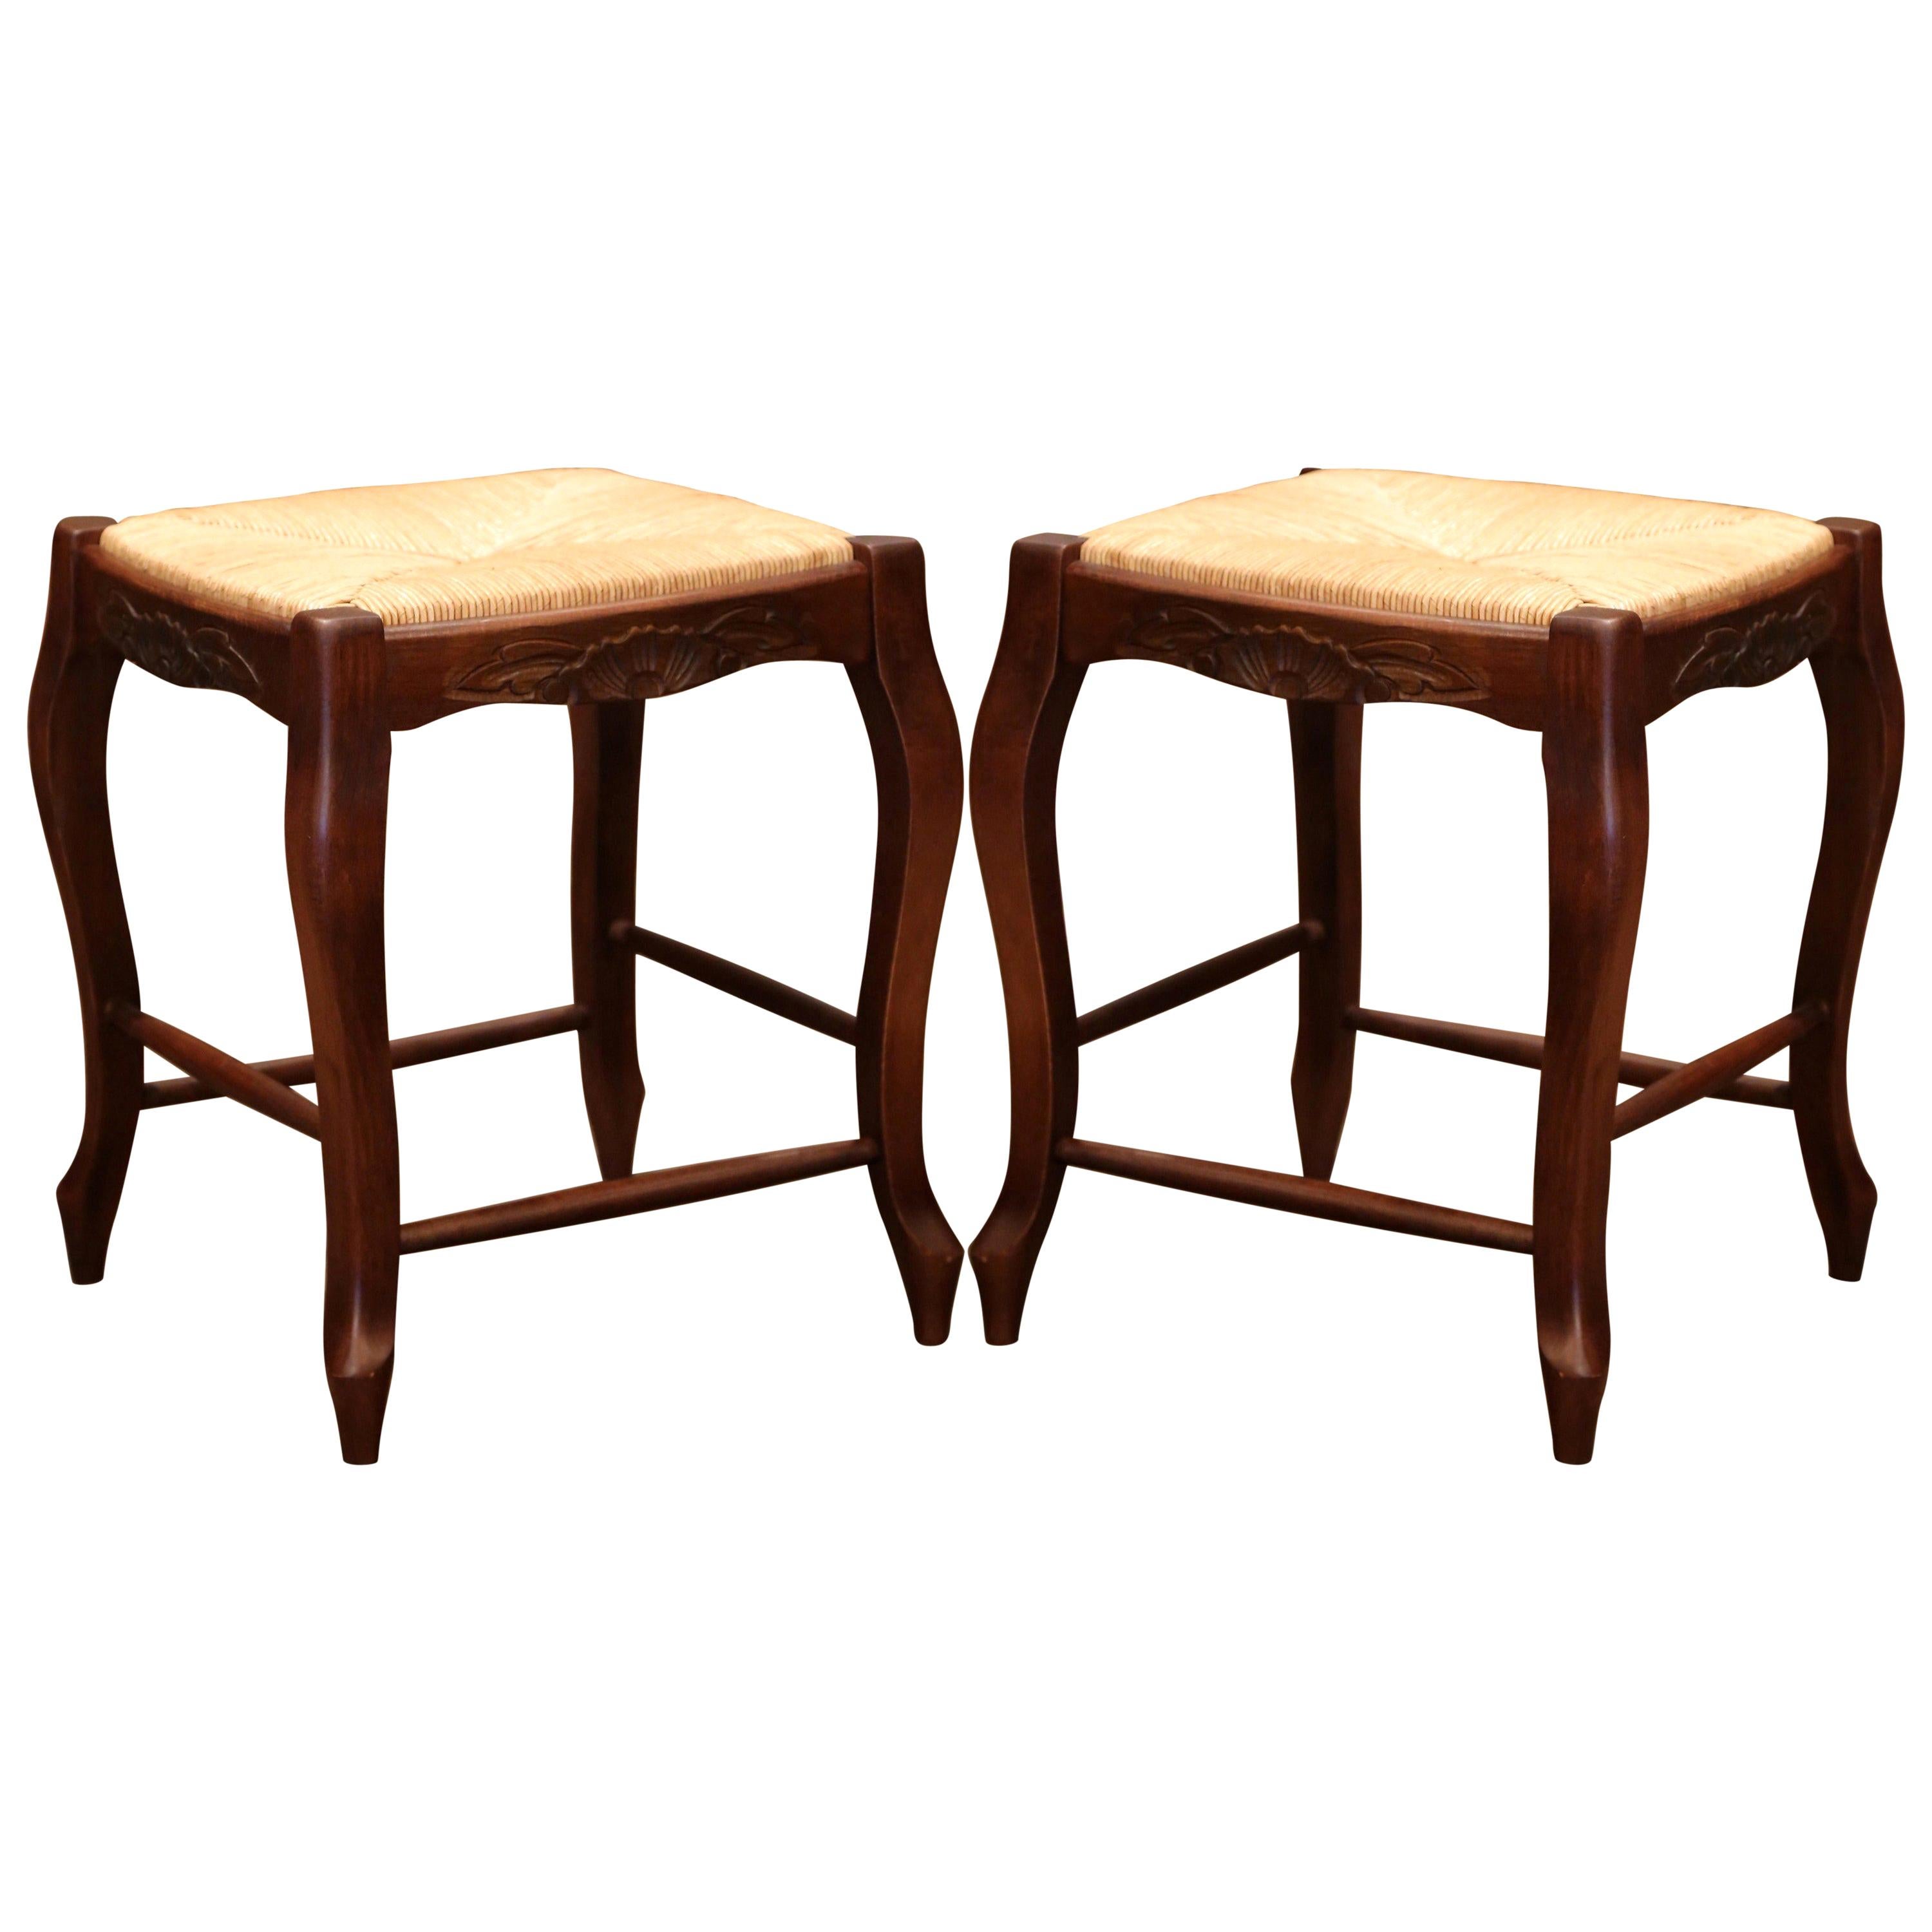 Pair of French Louis XV Carved Beech Wood Stools with Rush Seat